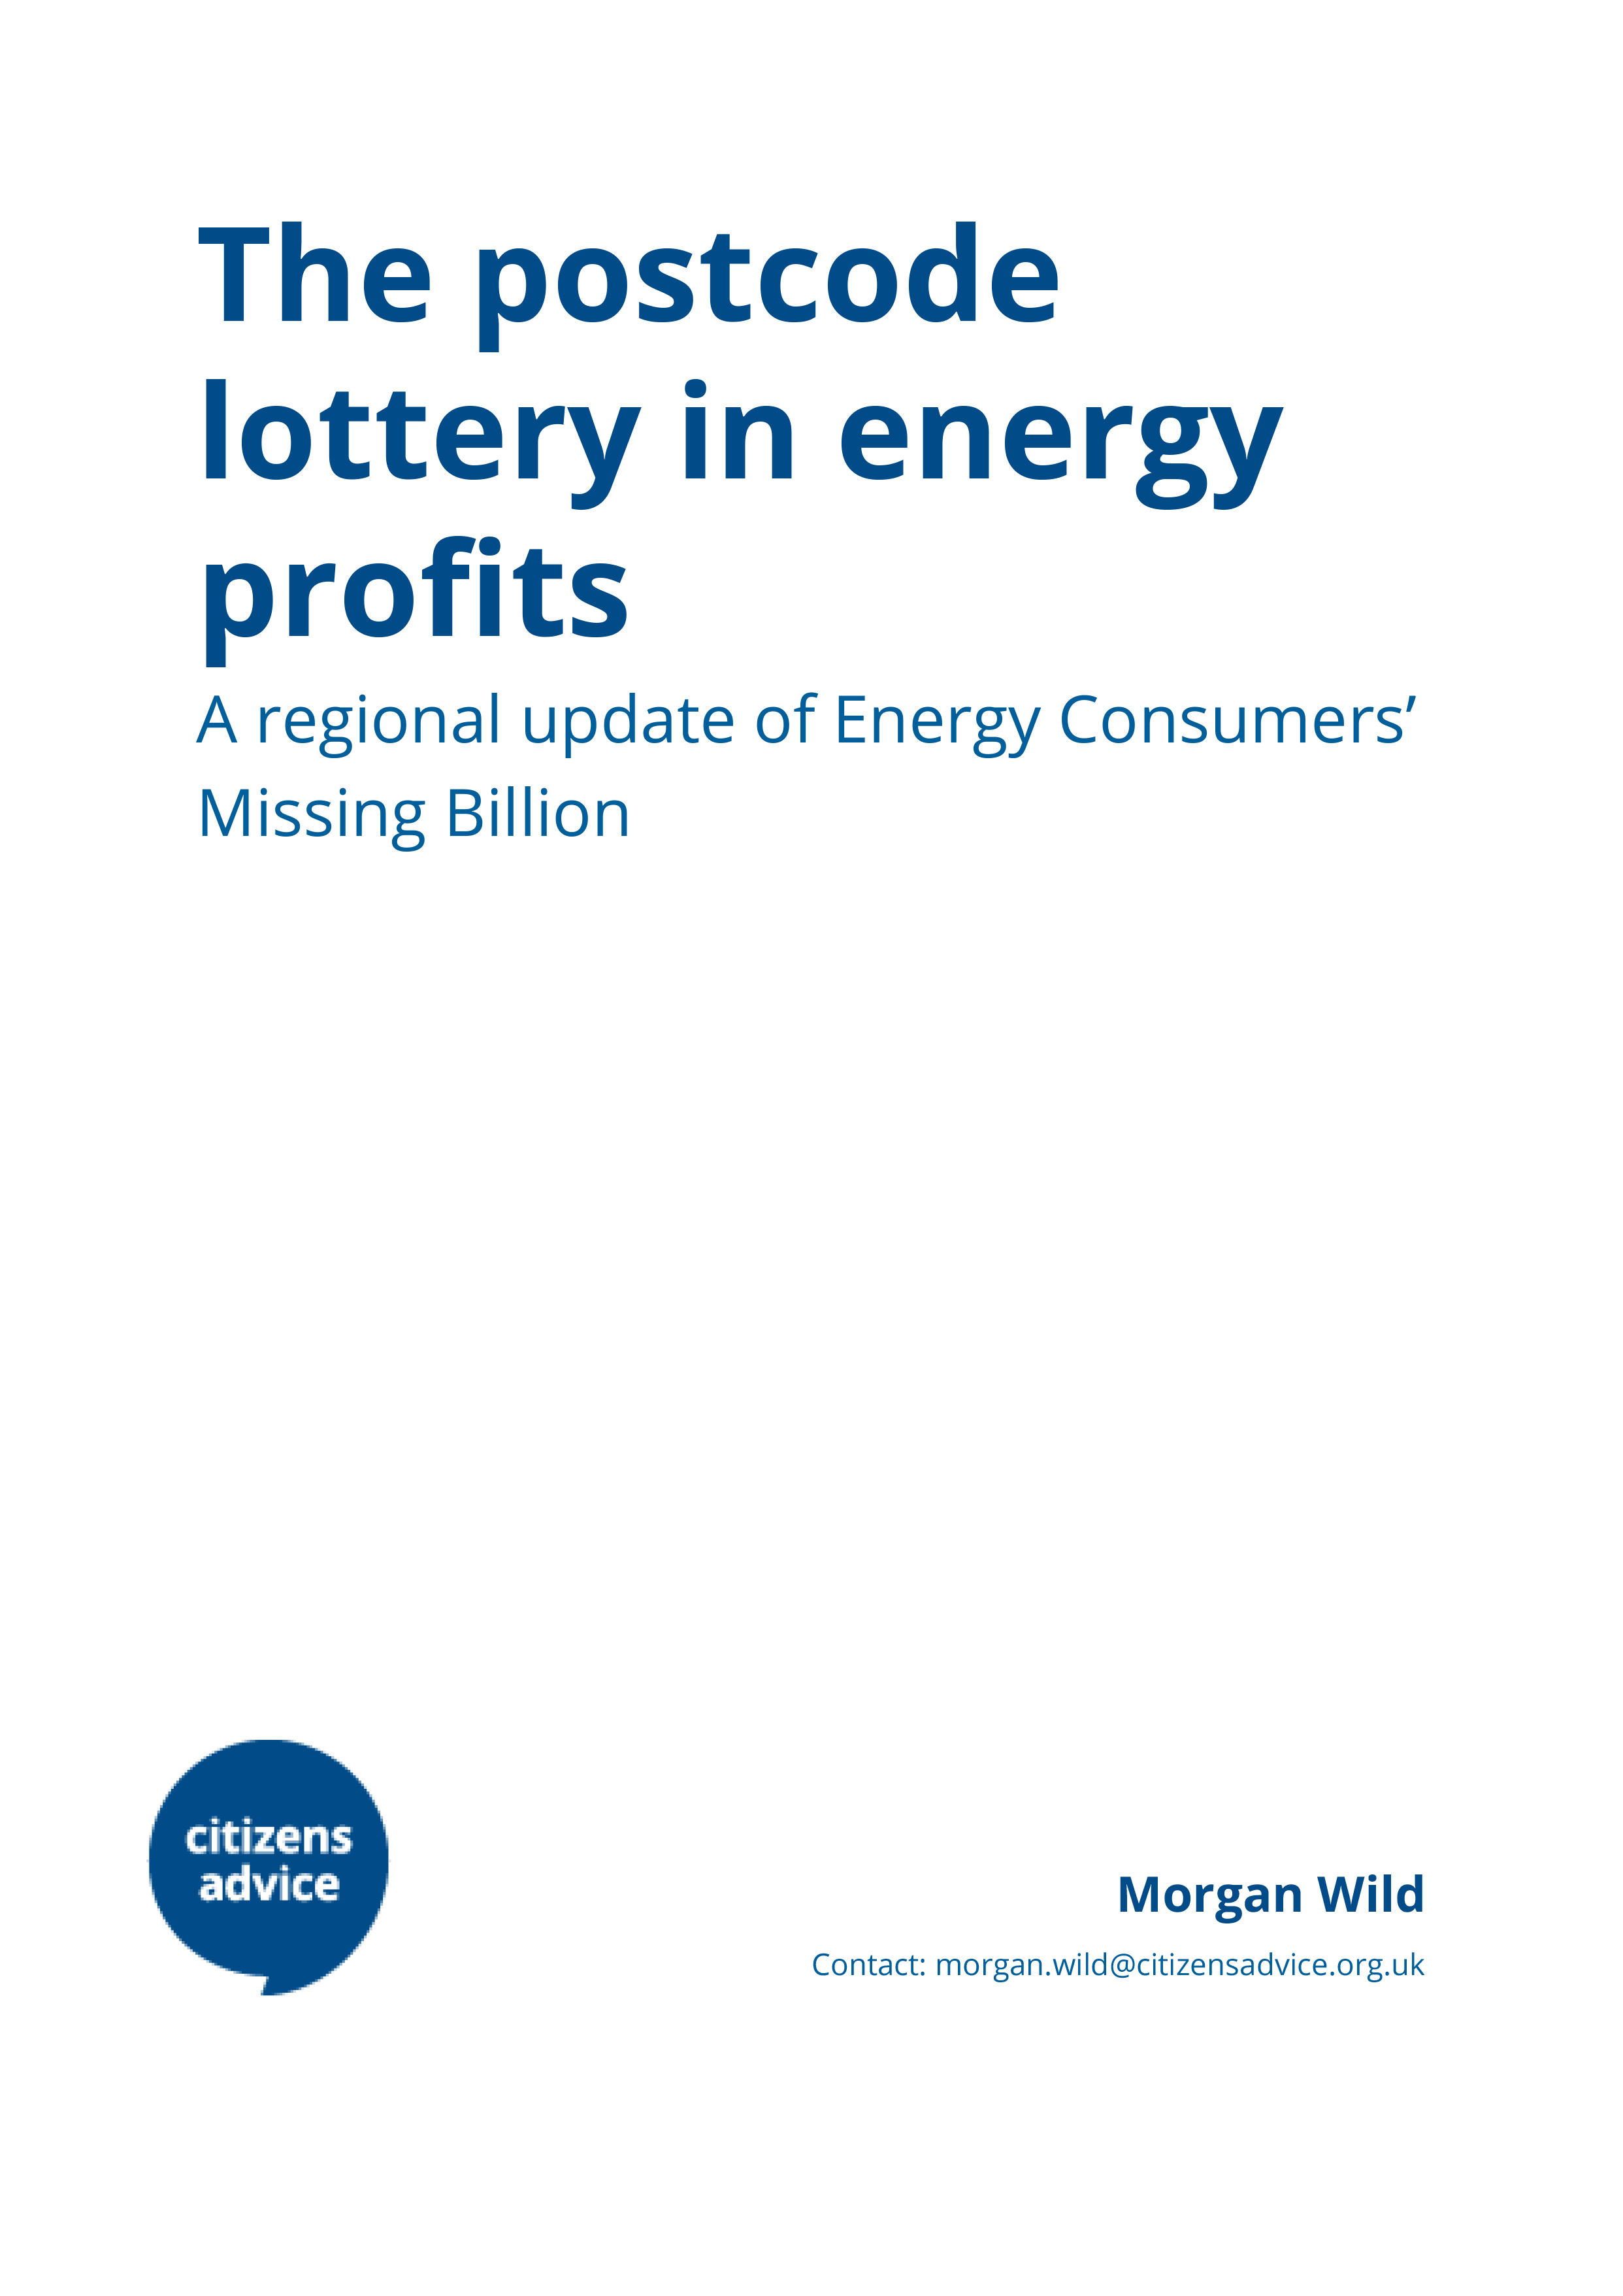 The postcode lottery in energy profits -  a regional update of Energy Consumers’ Missing Billions